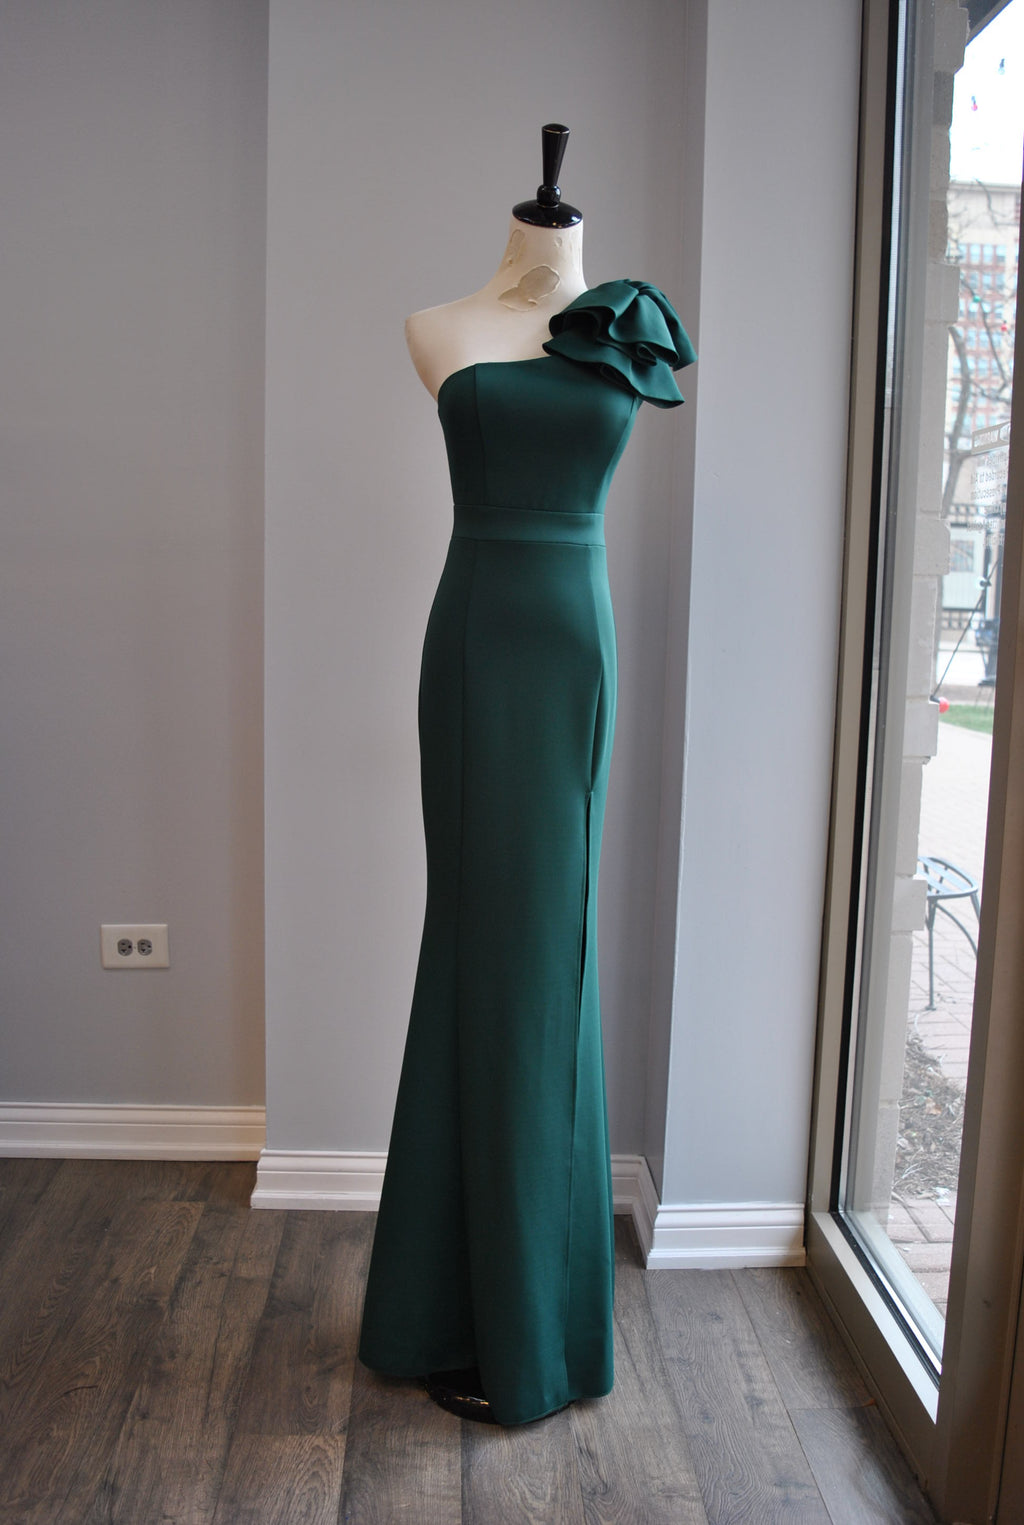 FOREST GREEN LONG EVENING DRESS WITH SIDE BOW